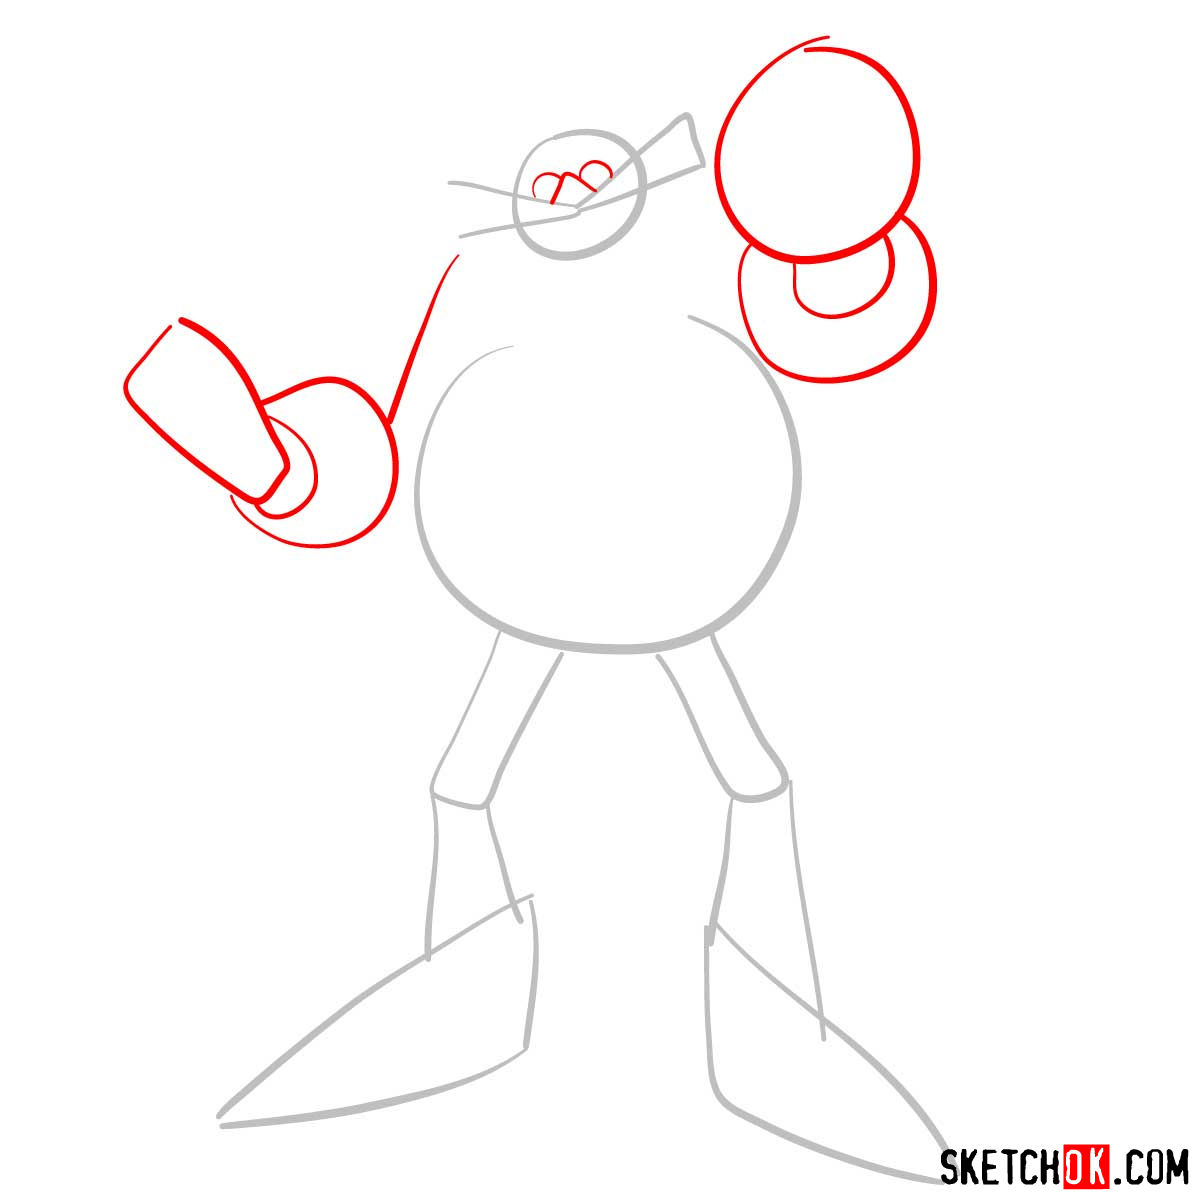 How to draw Dr. Robotnik (Eggman) from Sonic the Hedgehog - step 02